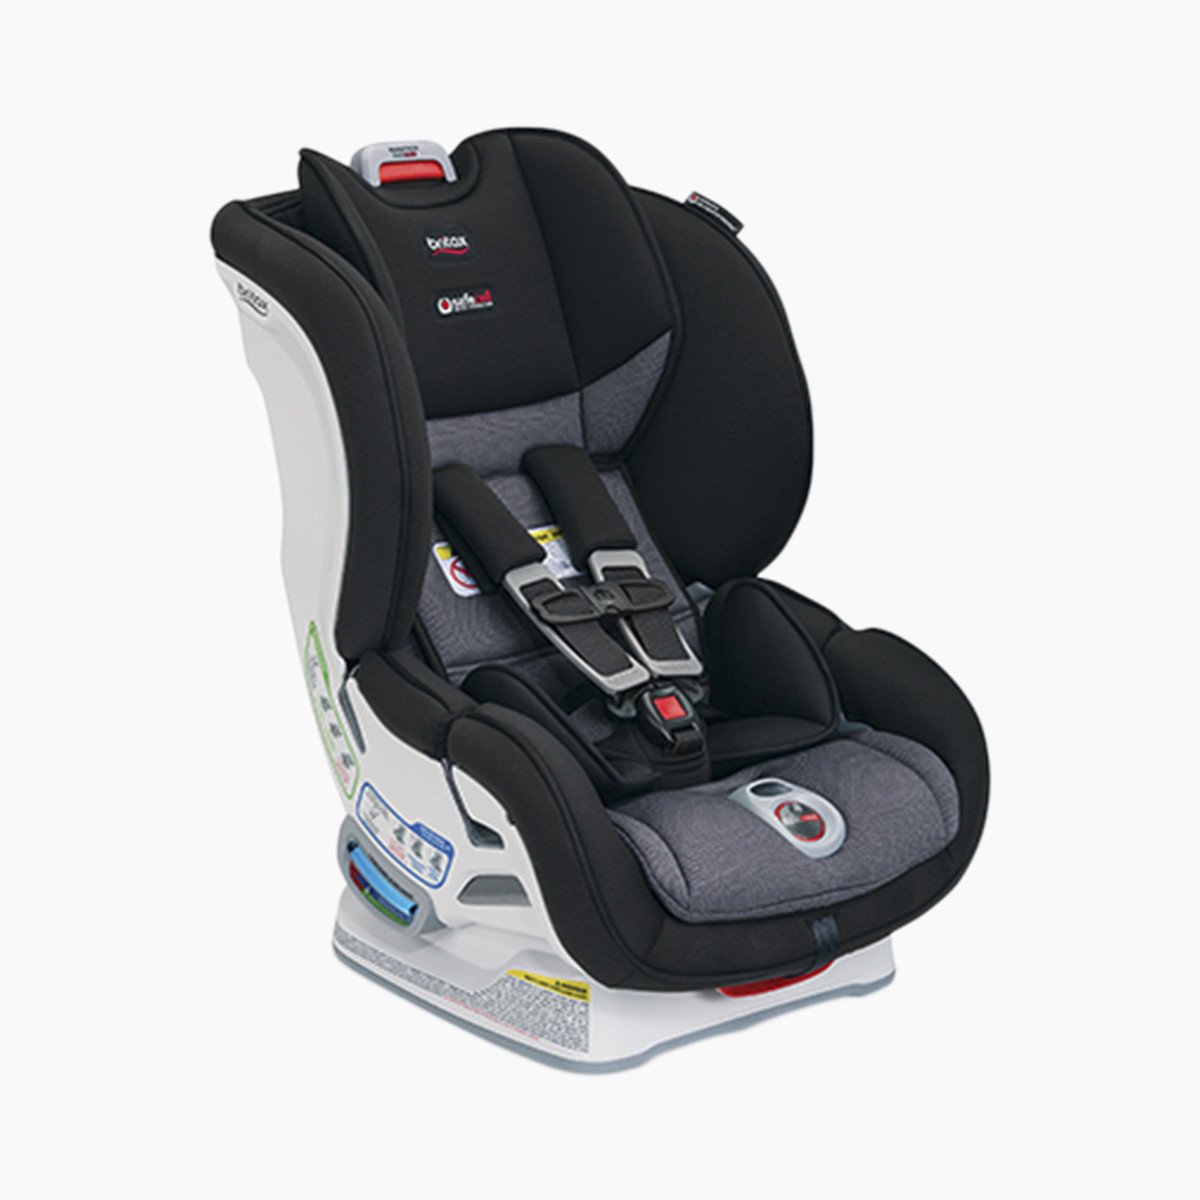 How Long Can You Use A Britax Car Seat